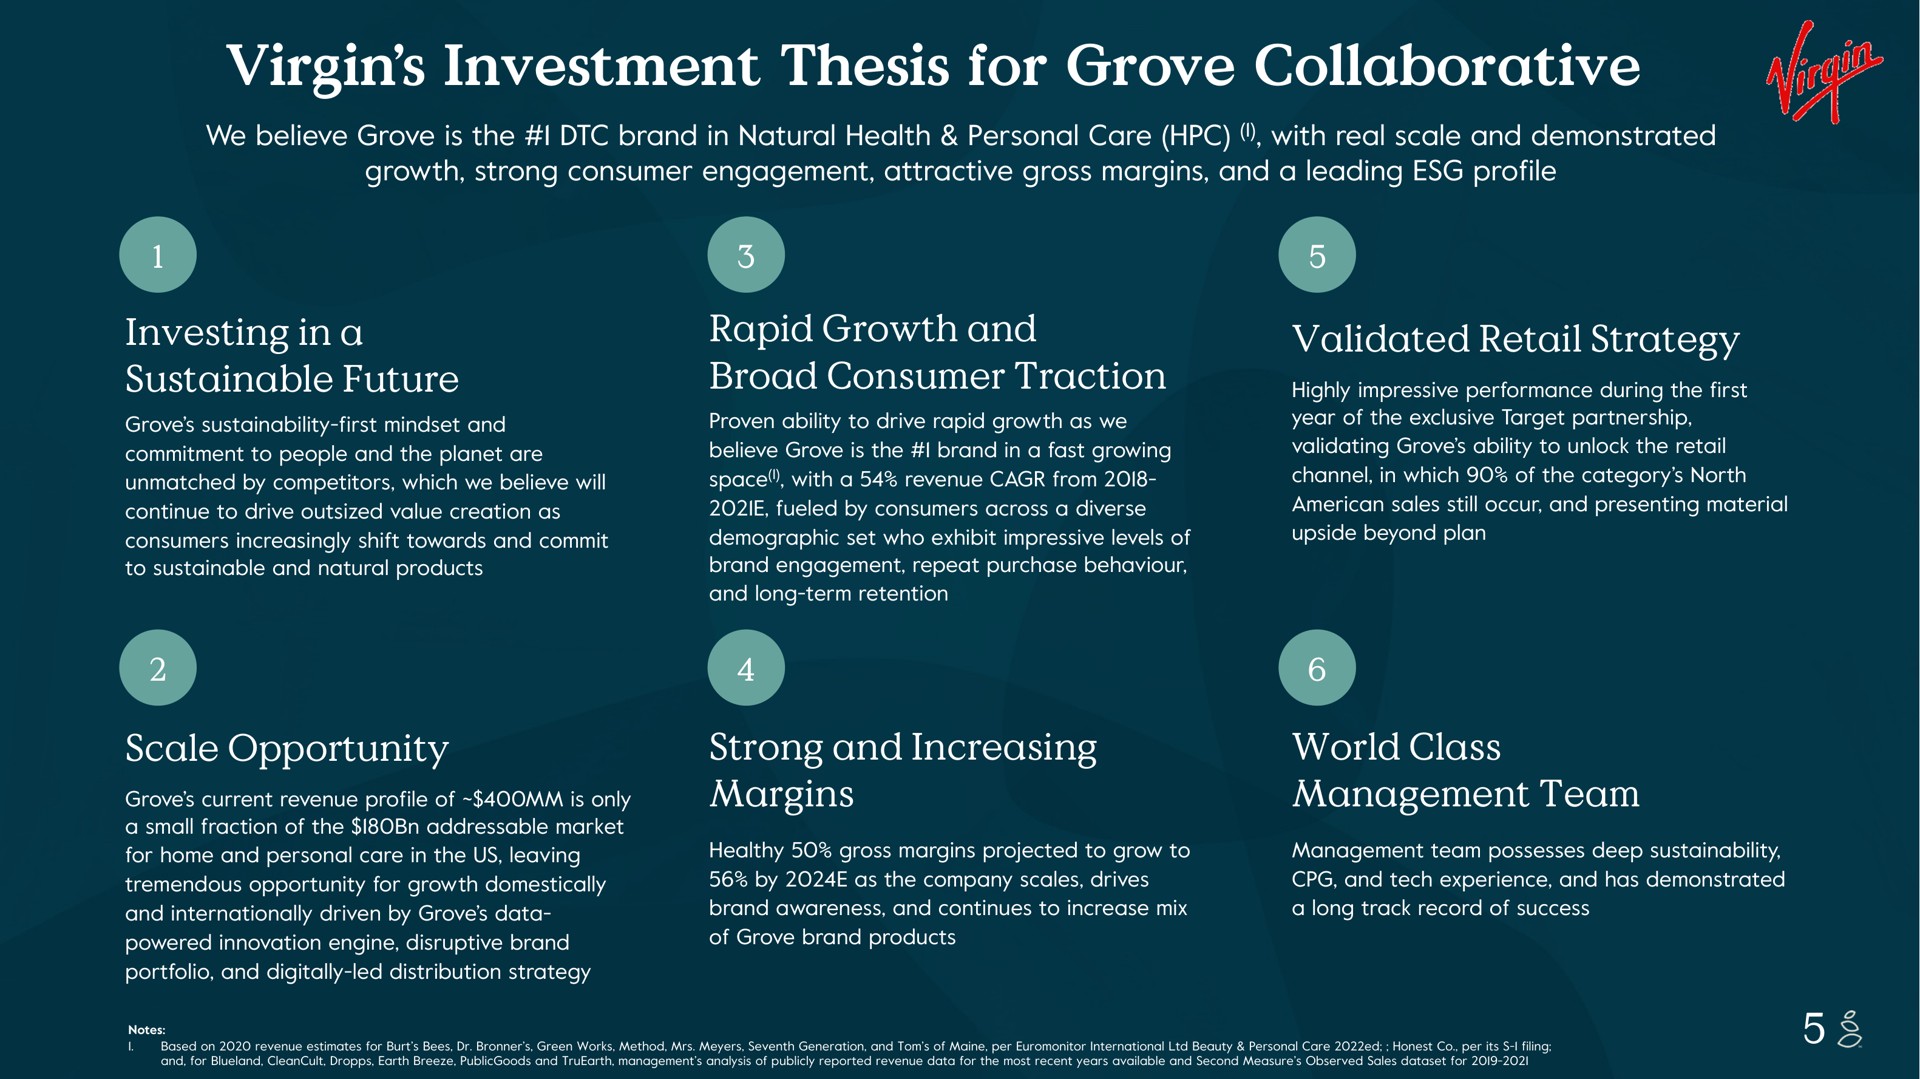 virgin investment thesis for grove collaborative investing in a sustainable future rapid growth and broad consumer traction validated retail strategy scale opportunity strong and increasing margins world class management team we believe is the brand natural health personal care with real demonstrated engagement attractive gross leading profile first commitment to people the planet are unmatched by competitors which we believe will continue to drive outsized value creation as consumers increasingly shift towards commit to natural products proven ability to drive as we believe is the i brand fast growing space with revenue from i fueled by consumers across diverse demographic set who exhibit impressive levels of brand engagement repeat purchase behaviour long term retention highly impressive performance during the first year of the exclusive target partnership validating ability to unlock the channel which of the category north sales still occur presenting material upside beyond plan current revenue profile of is only small fraction of the i market home personal care the us leaving tremendous domestically internationally driven by data powered innovation engine disruptive brand portfolio digitally led distribution healthy gross projected to grow to by as the company scales drives brand awareness continues to increase mix of brand products possesses deep tech experience has demonstrated long track record of success based on revenue estimates burt bees green works method seventh generation of per international beauty personal care honest per its i filing earth breeze analysis of publicly reported revenue data the most recent years available second measure observed sales | Grove